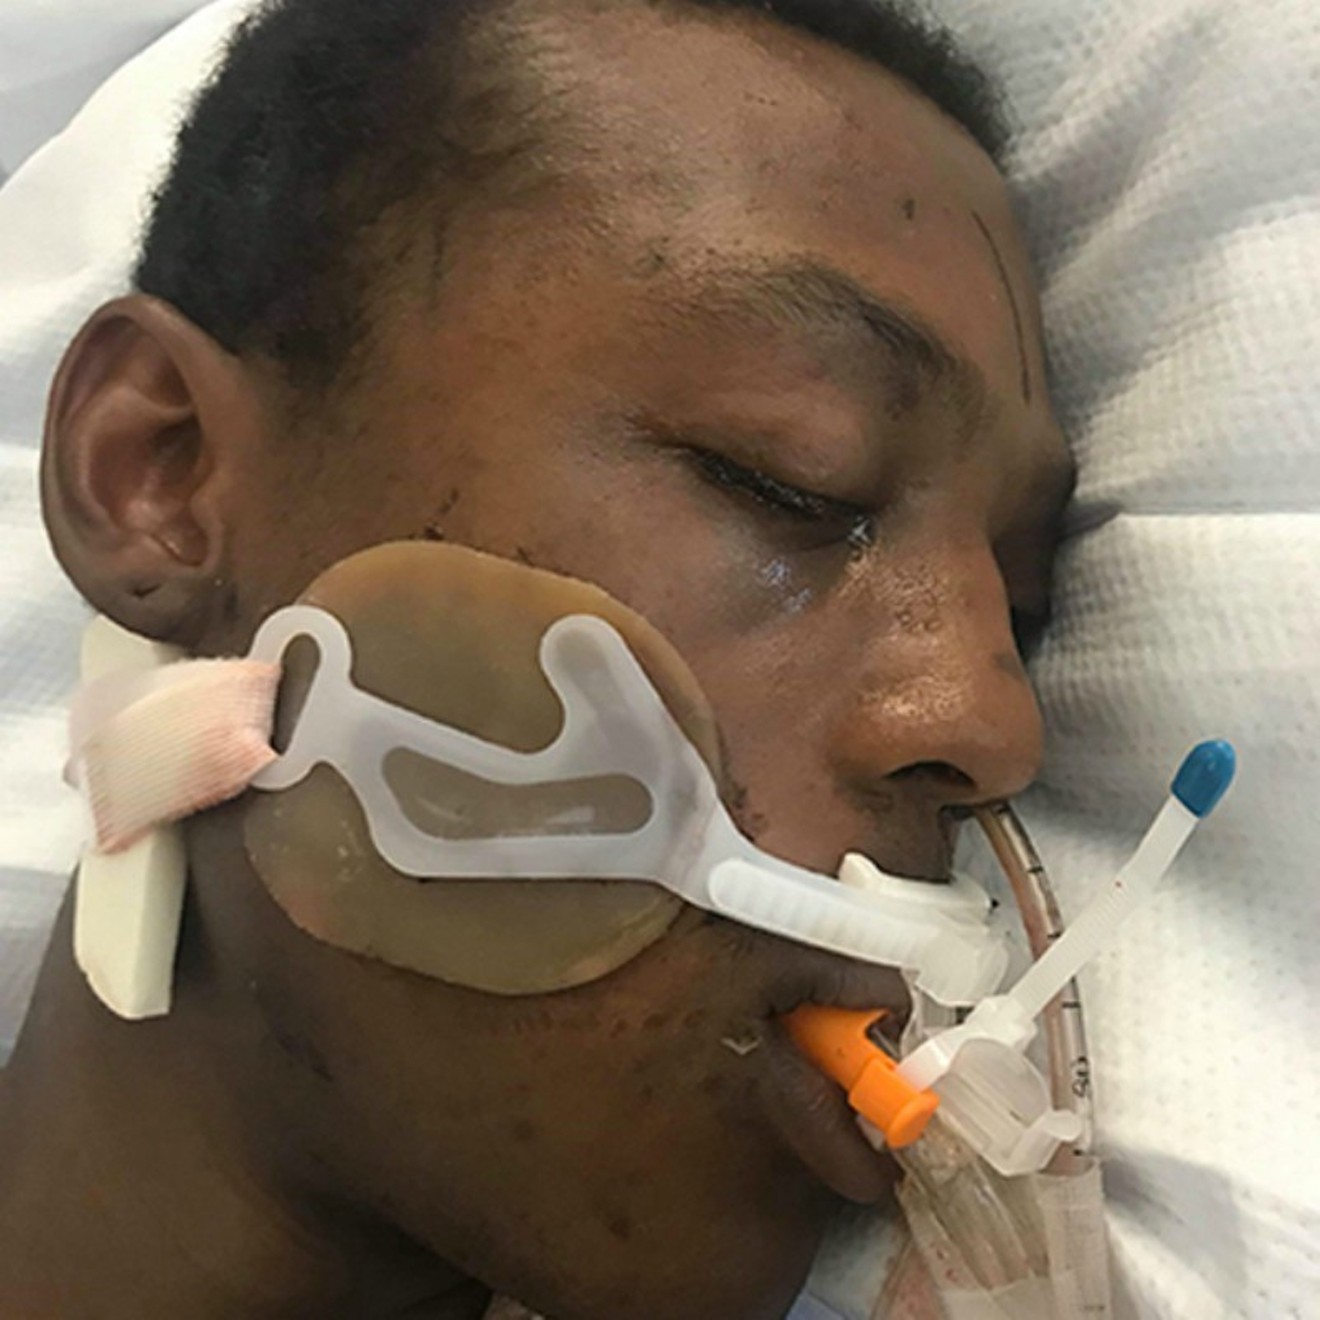 Elijah McClain after his encounter with Aurora police officers.